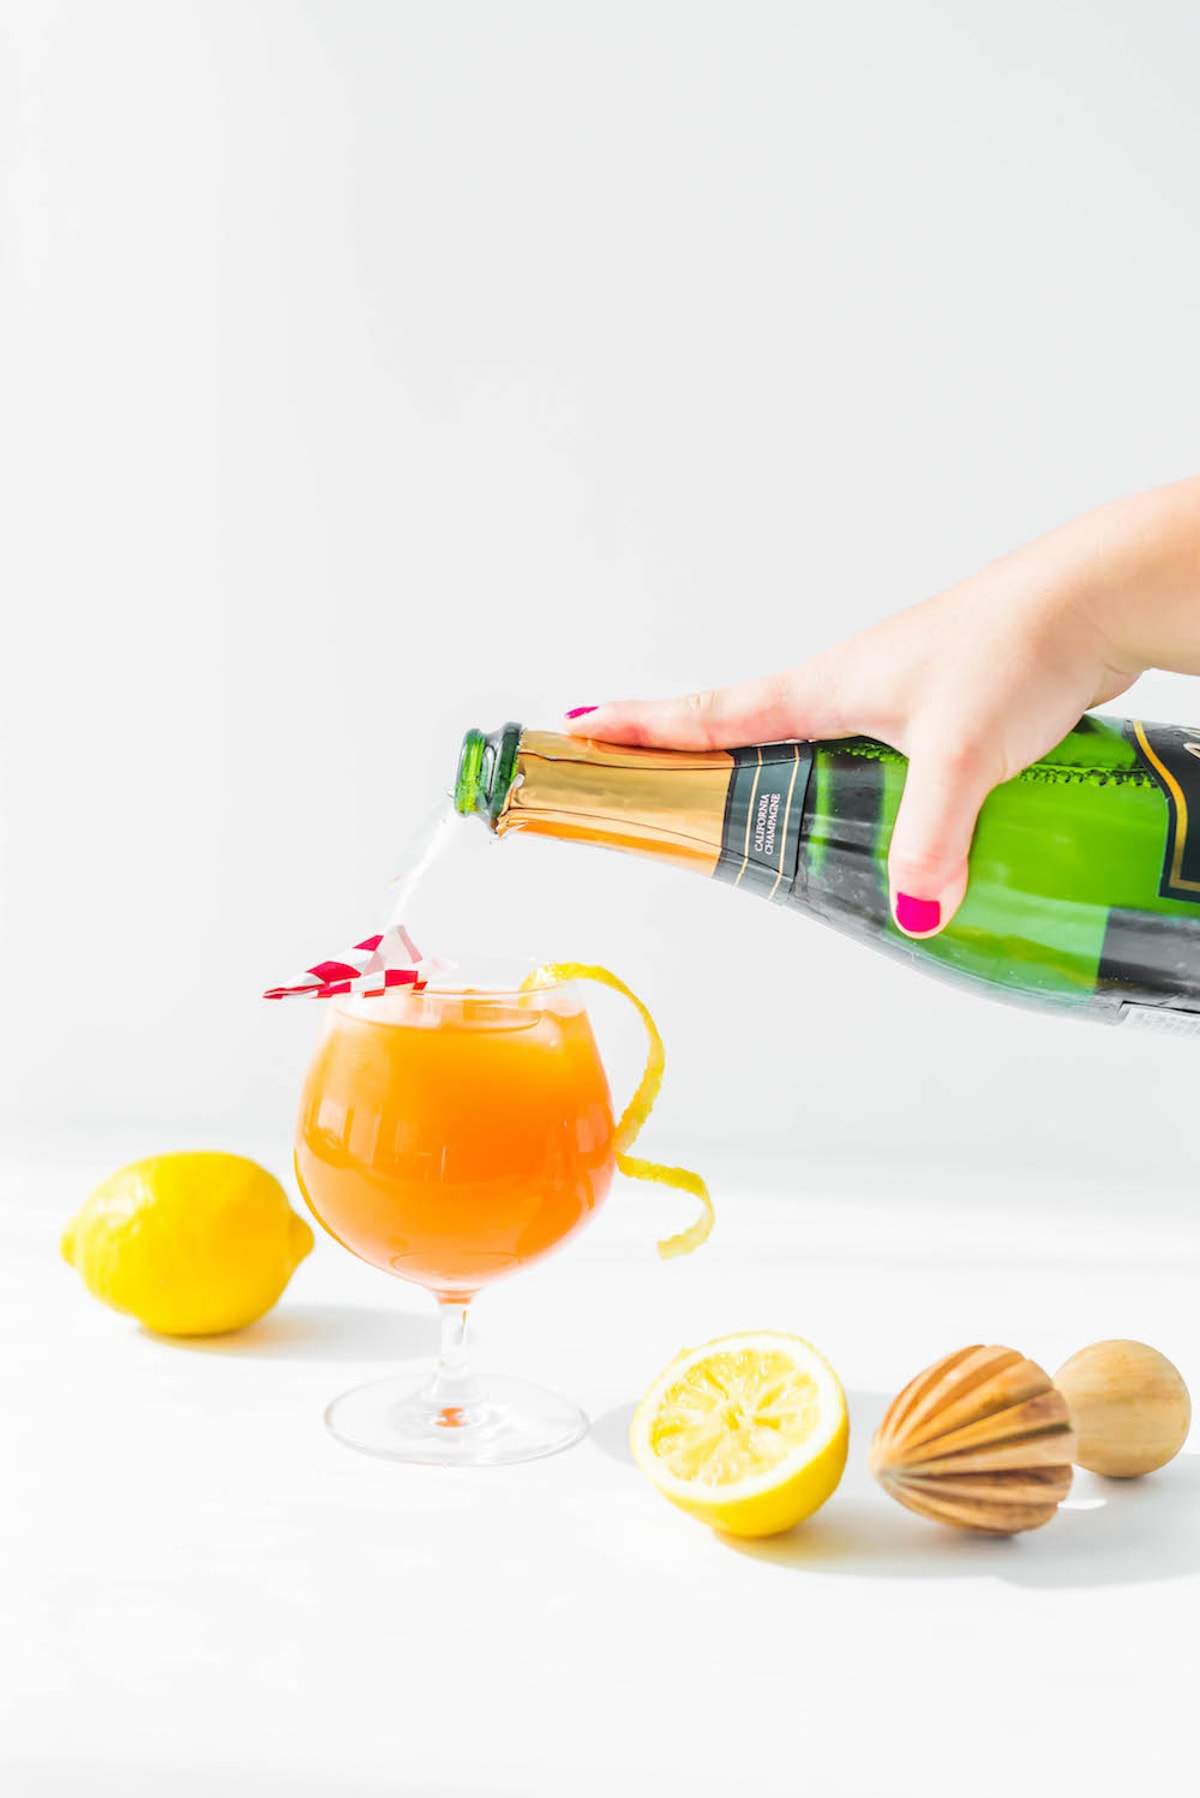 Paper Plane Spritz by Ashley Rose of Sugar & Cloth, a top lifestyle blog in Houston, Texas